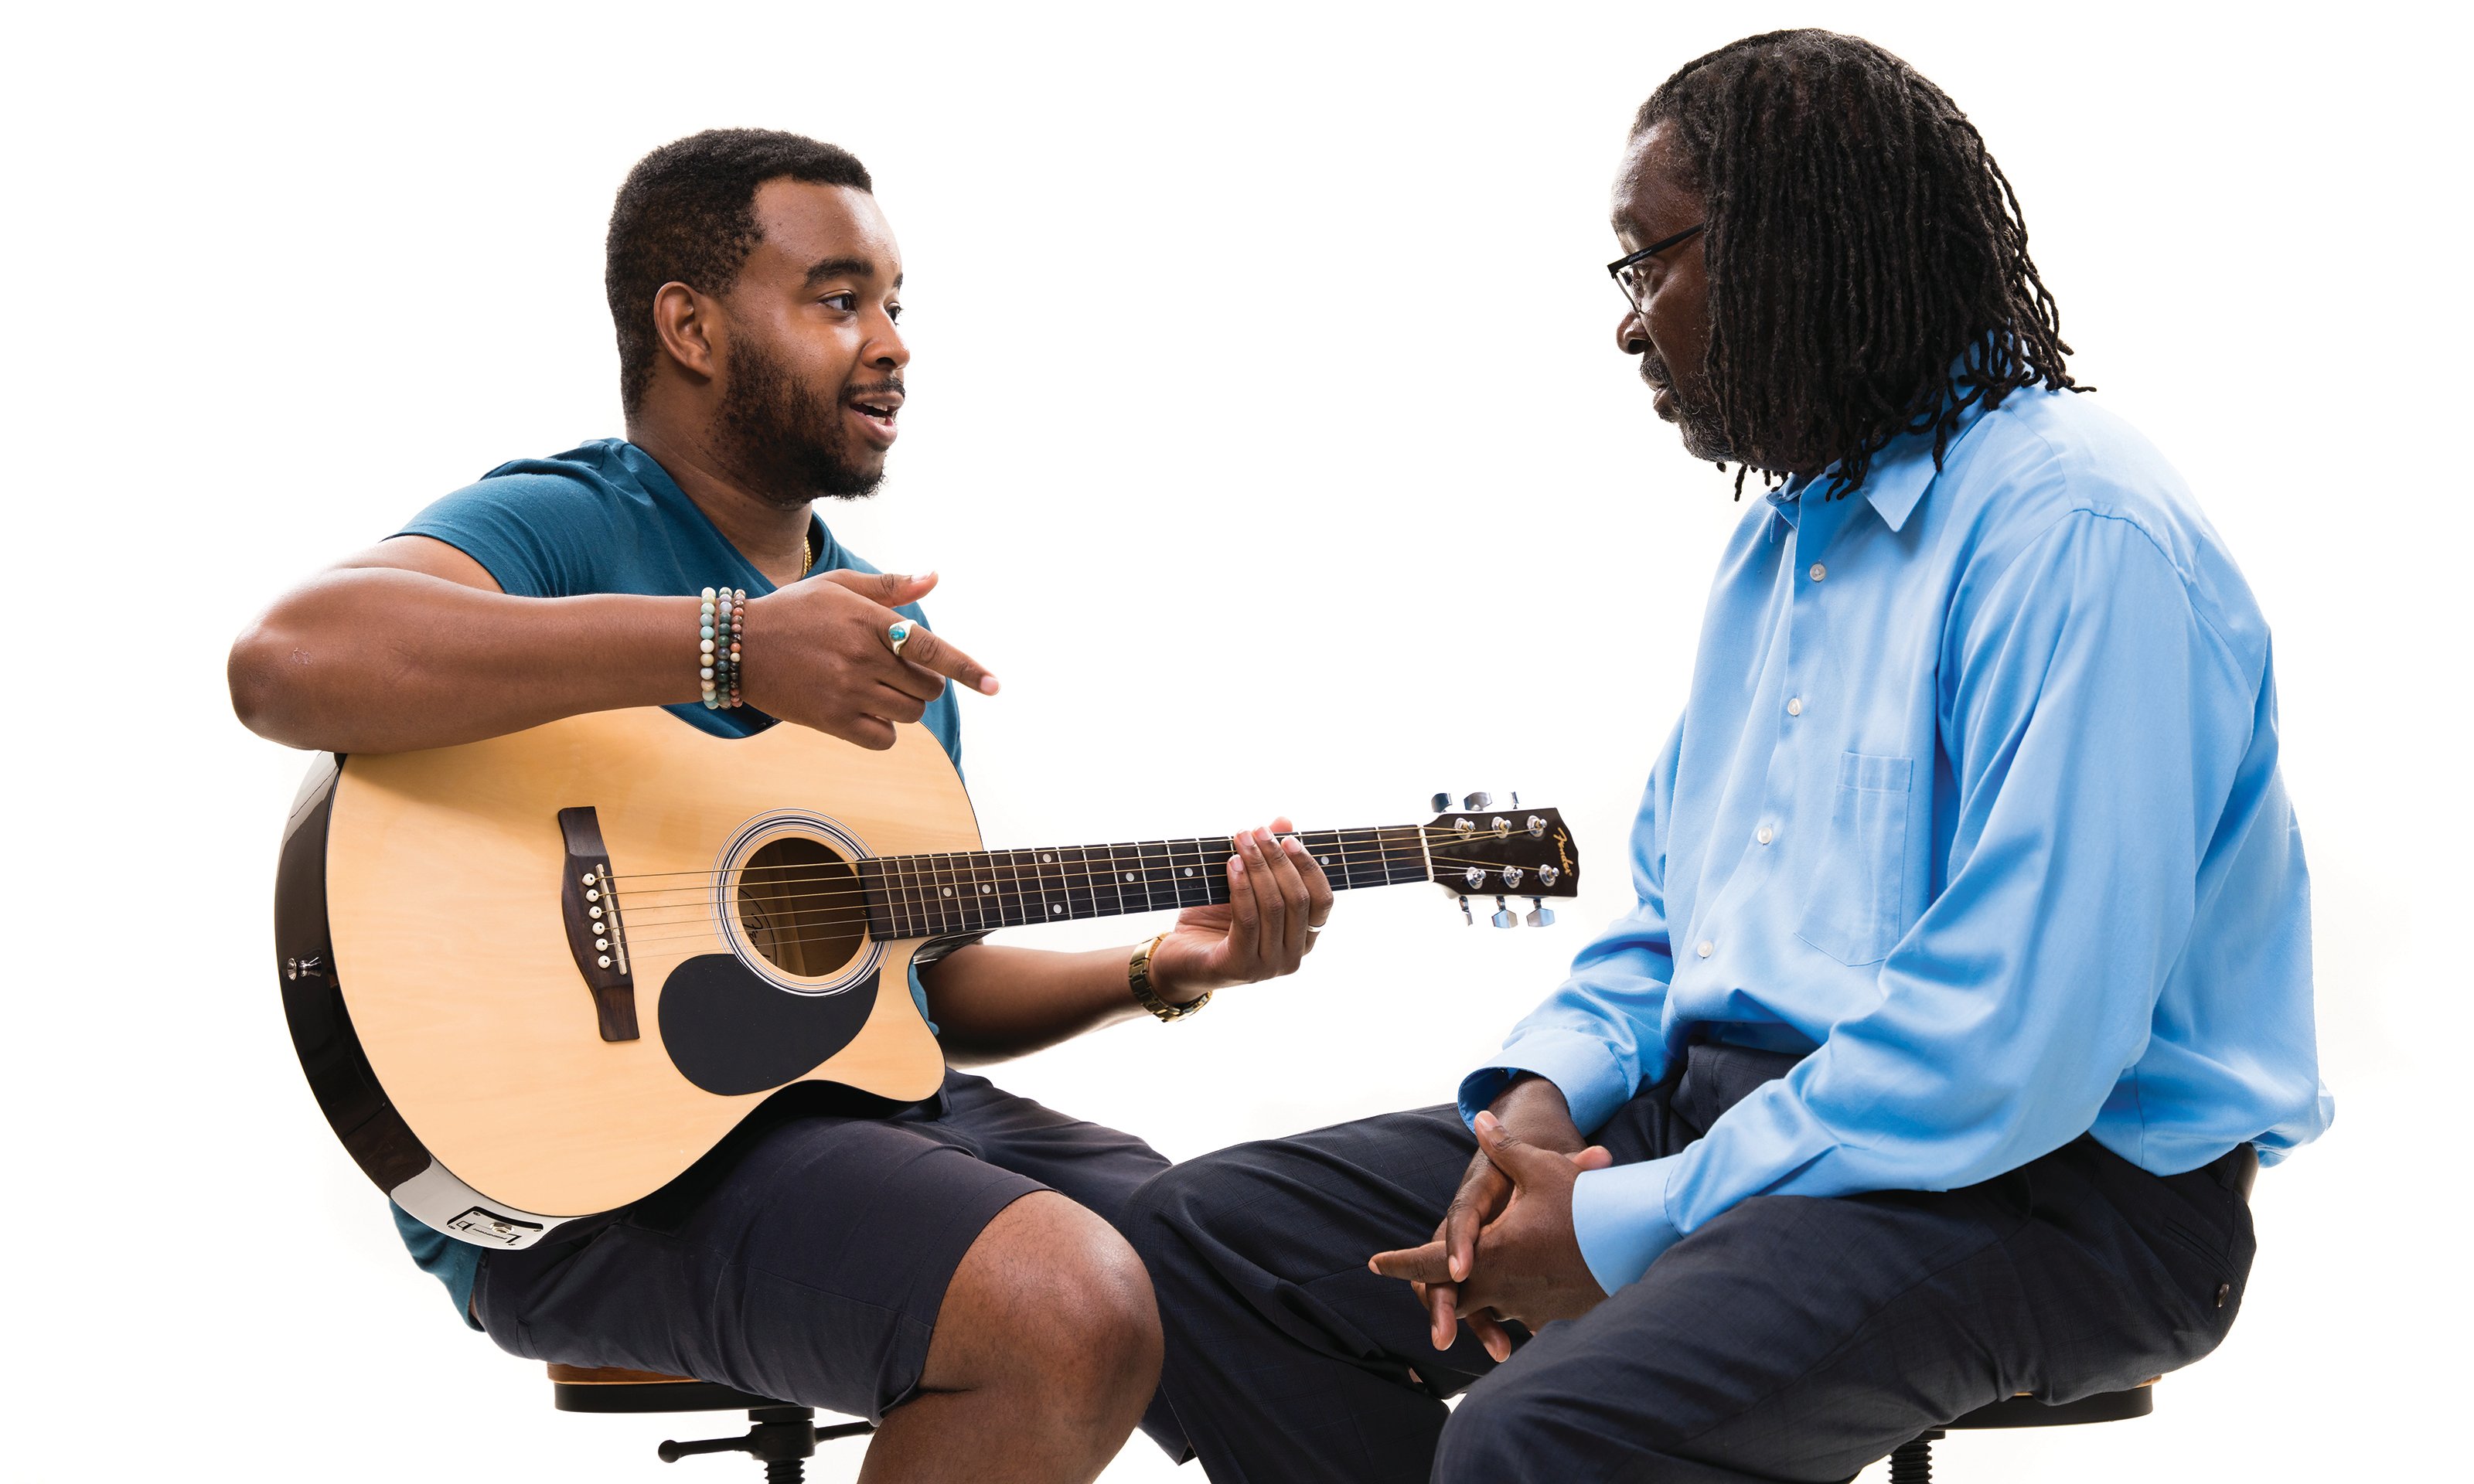 A man sitting and holding a guitar talking to another man.